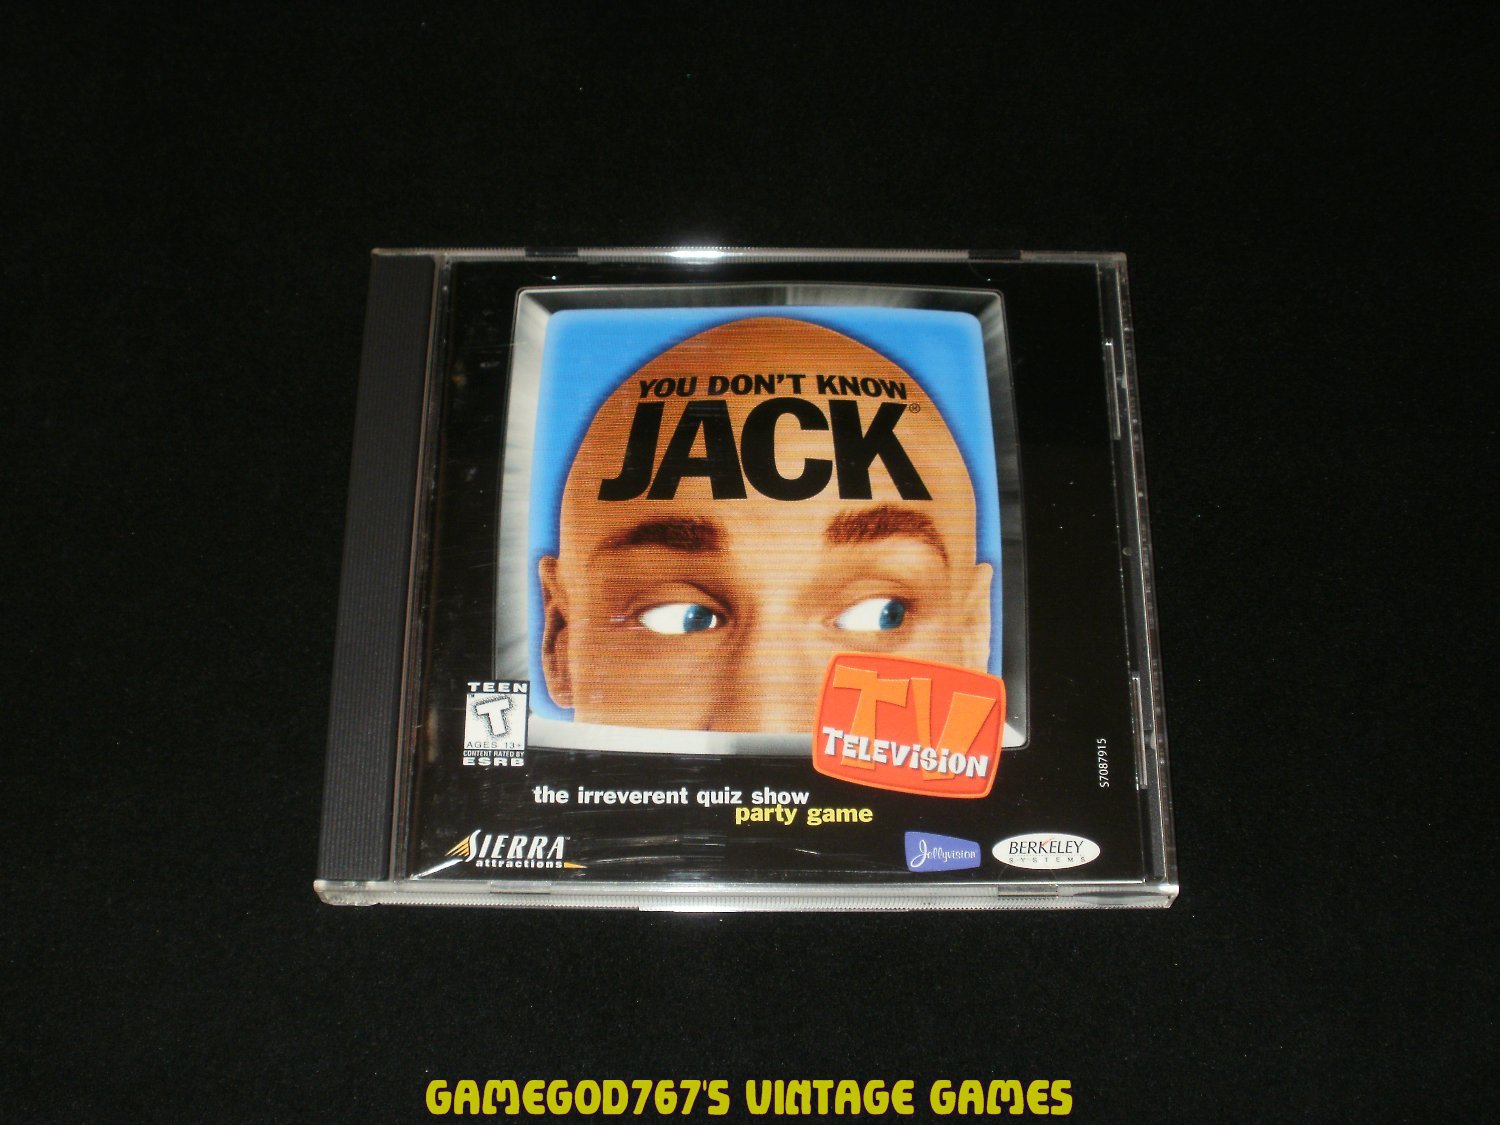 You Don't Know Jack Television - IBM PC - 1997 Sierra - Complete CIB